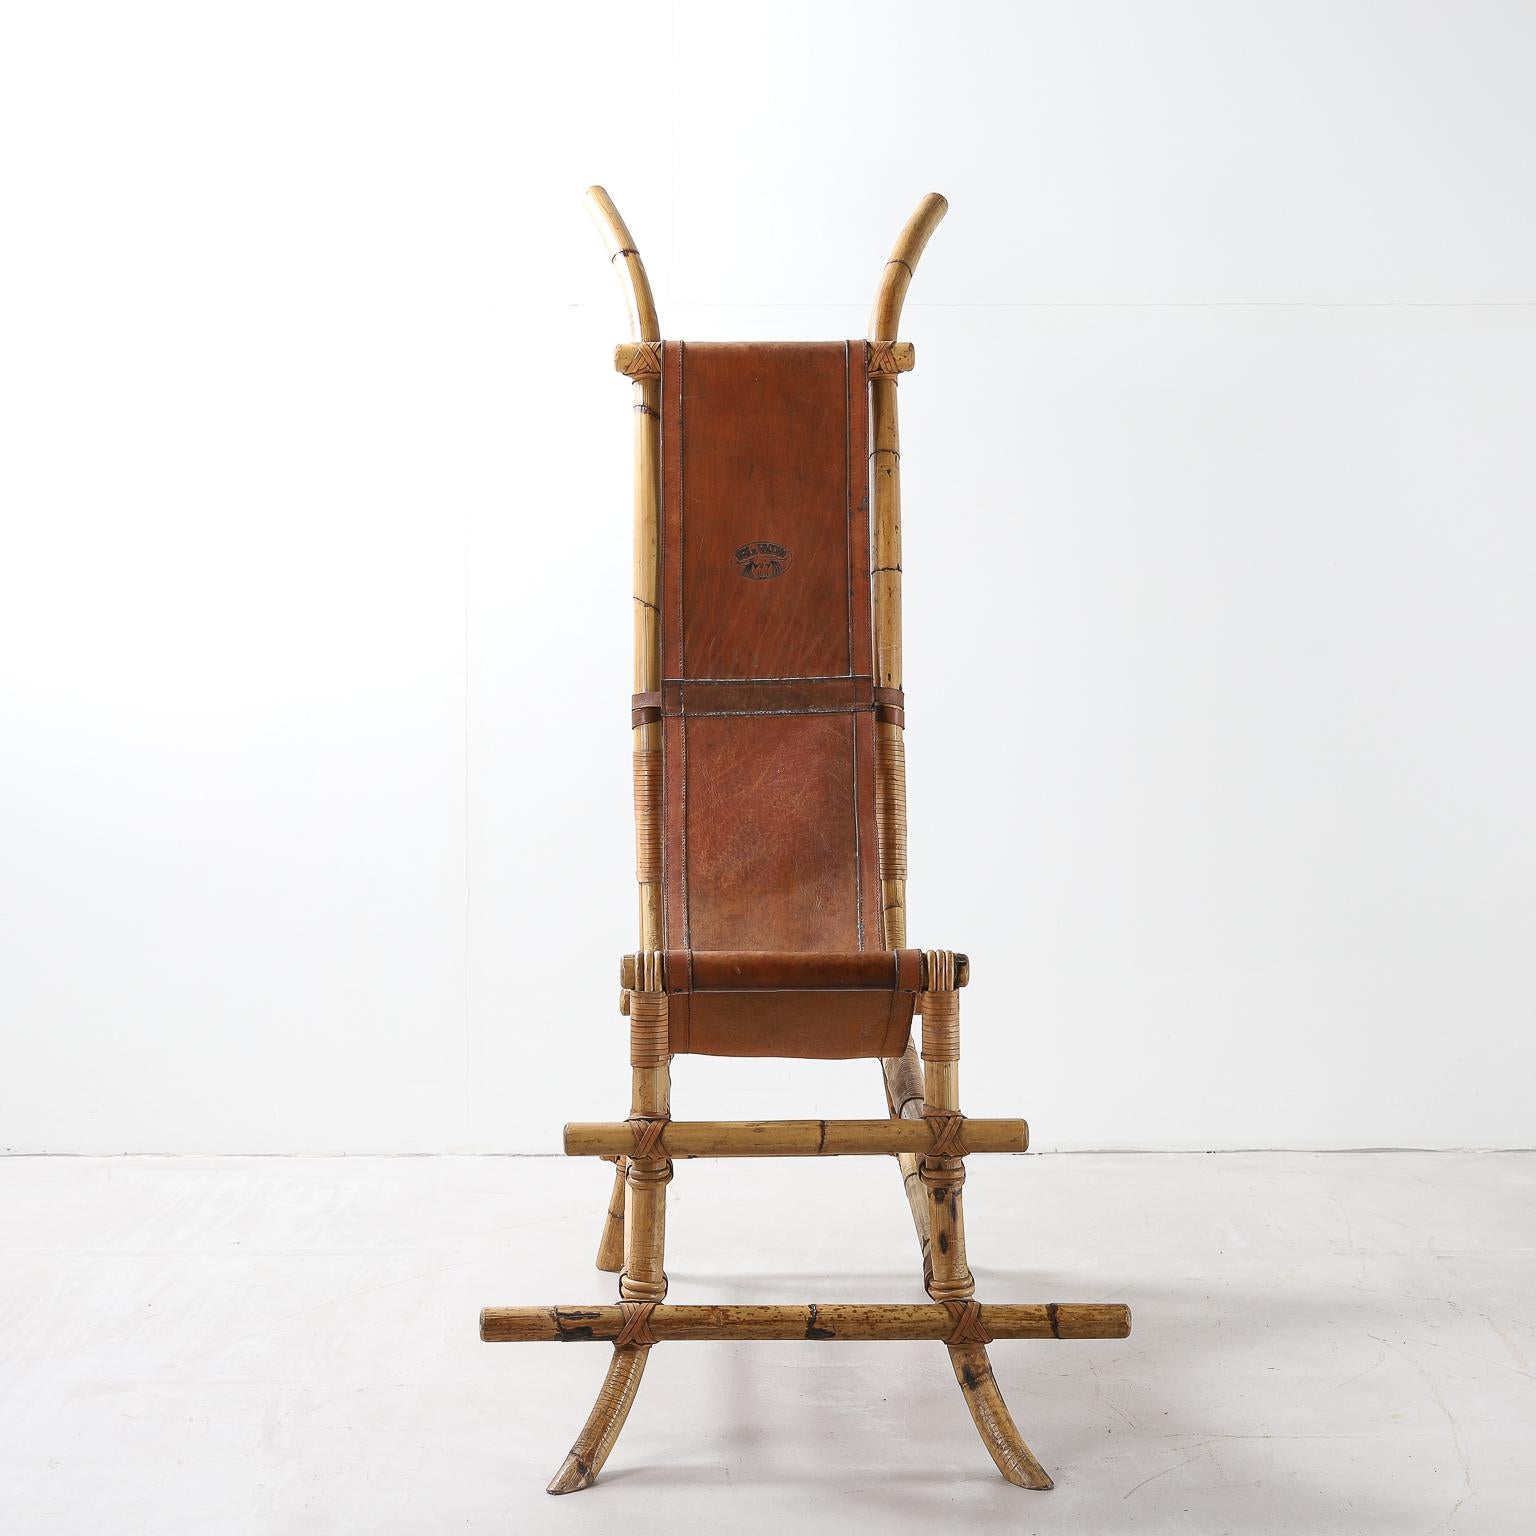 Italian sculptural chair with bamboo frame, leather cover marked ‘sem il vaccaro’ 1970s.